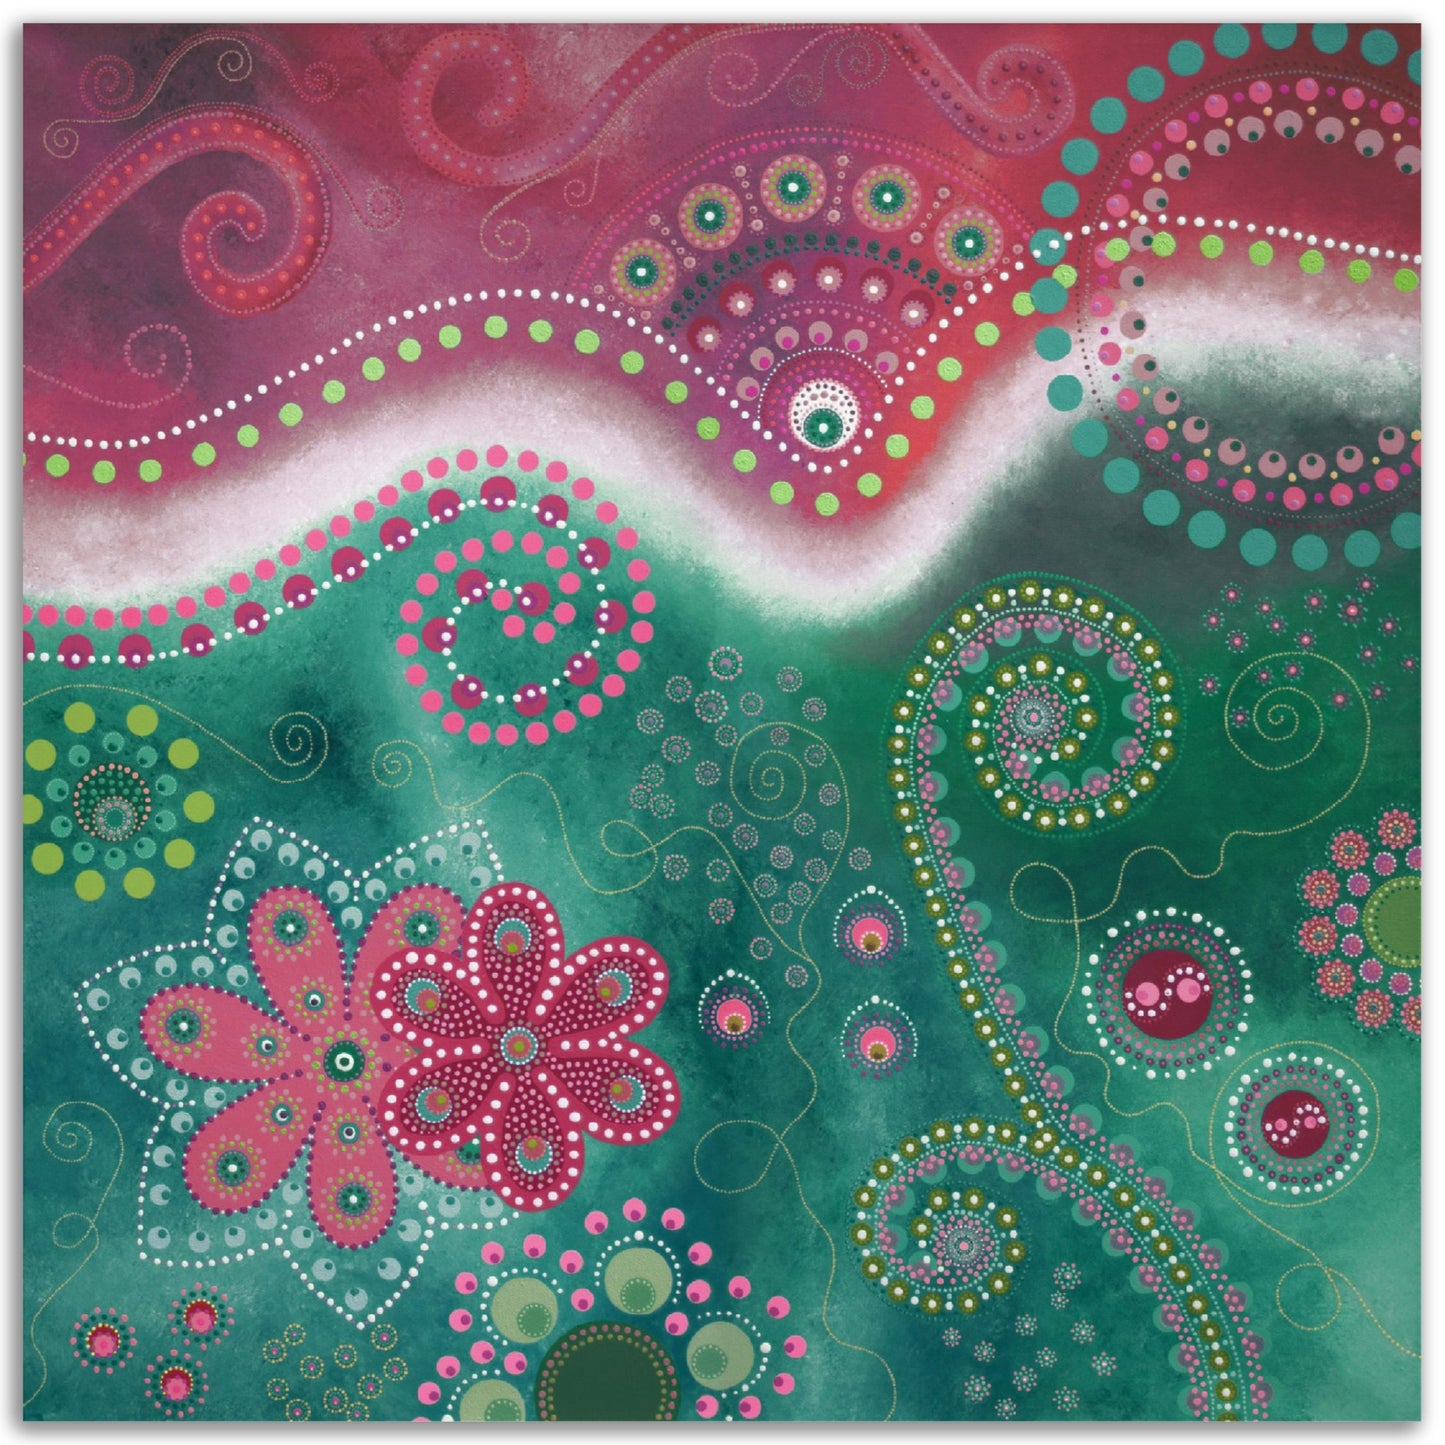 "The Happiness inside" - Pink and turquoise - by Fanny Fay Engström